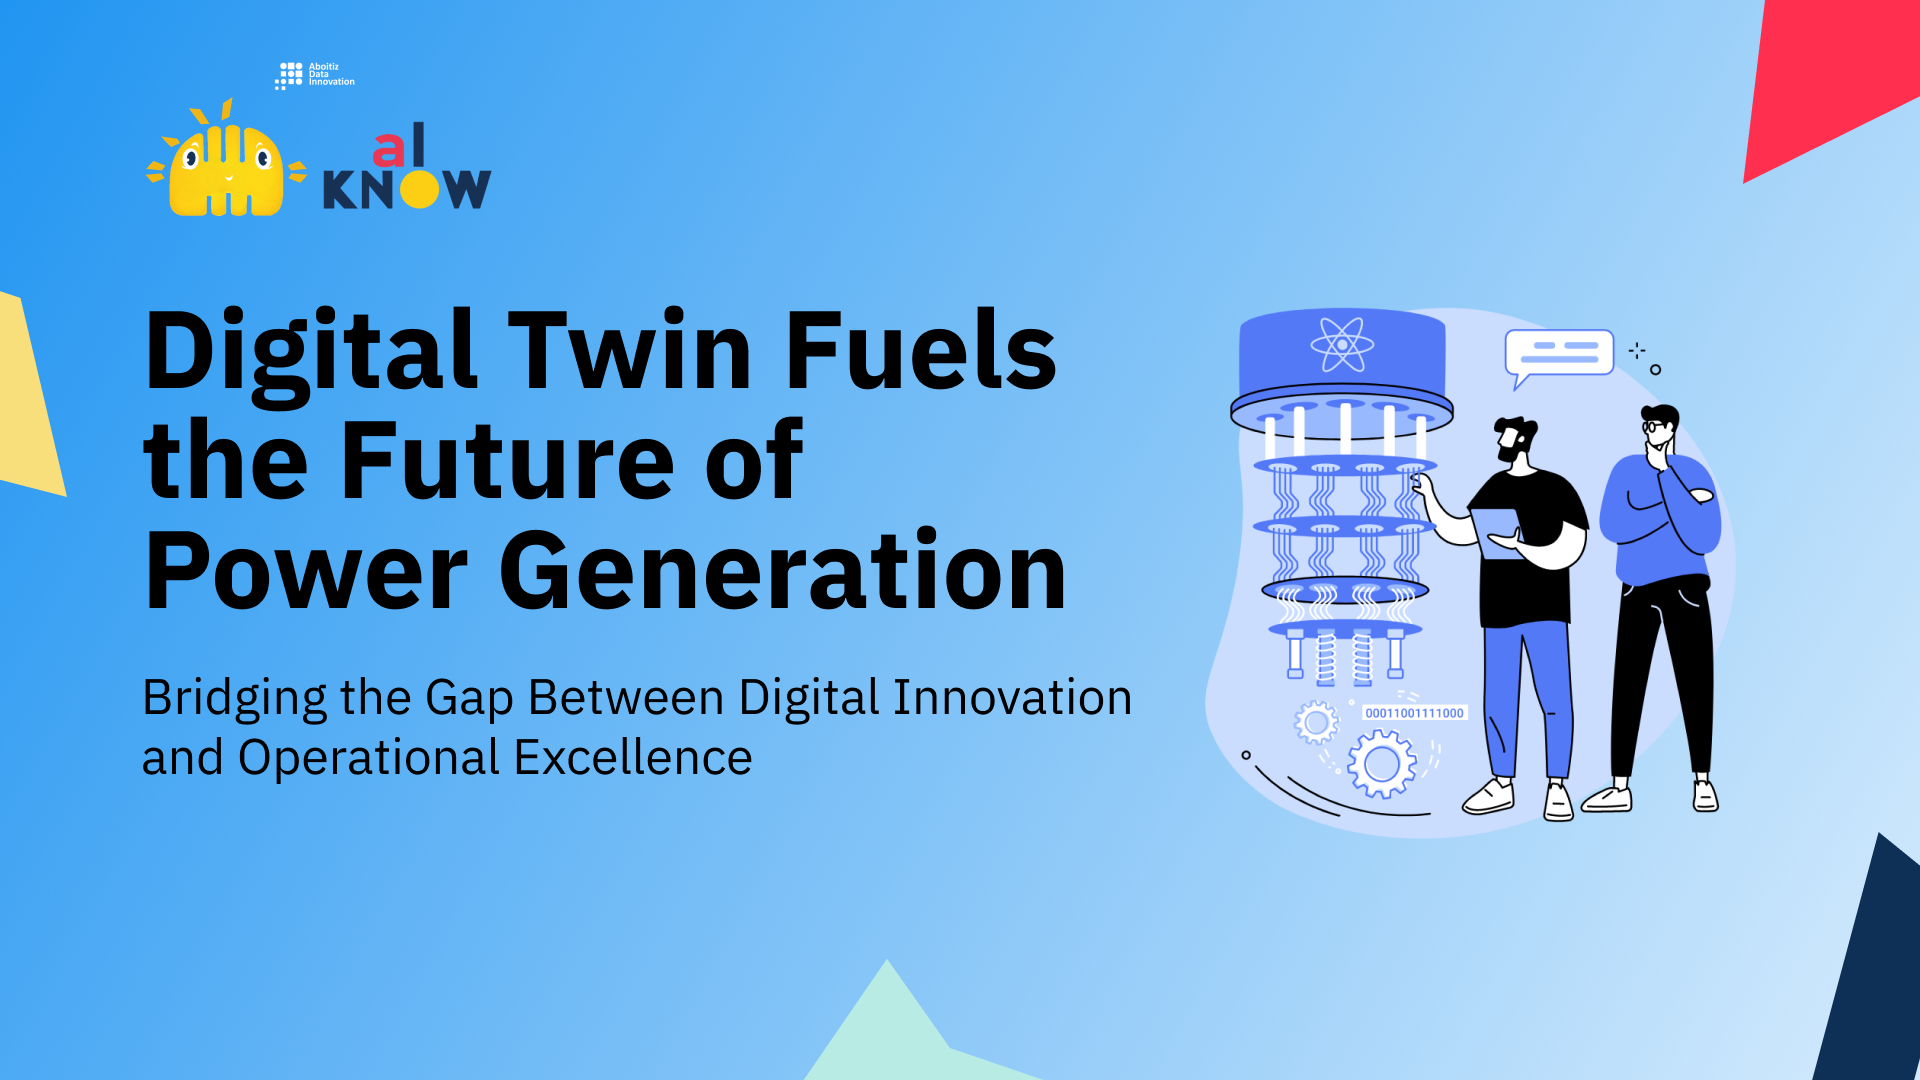 Digital Twin Fuels the Future of Power Generation